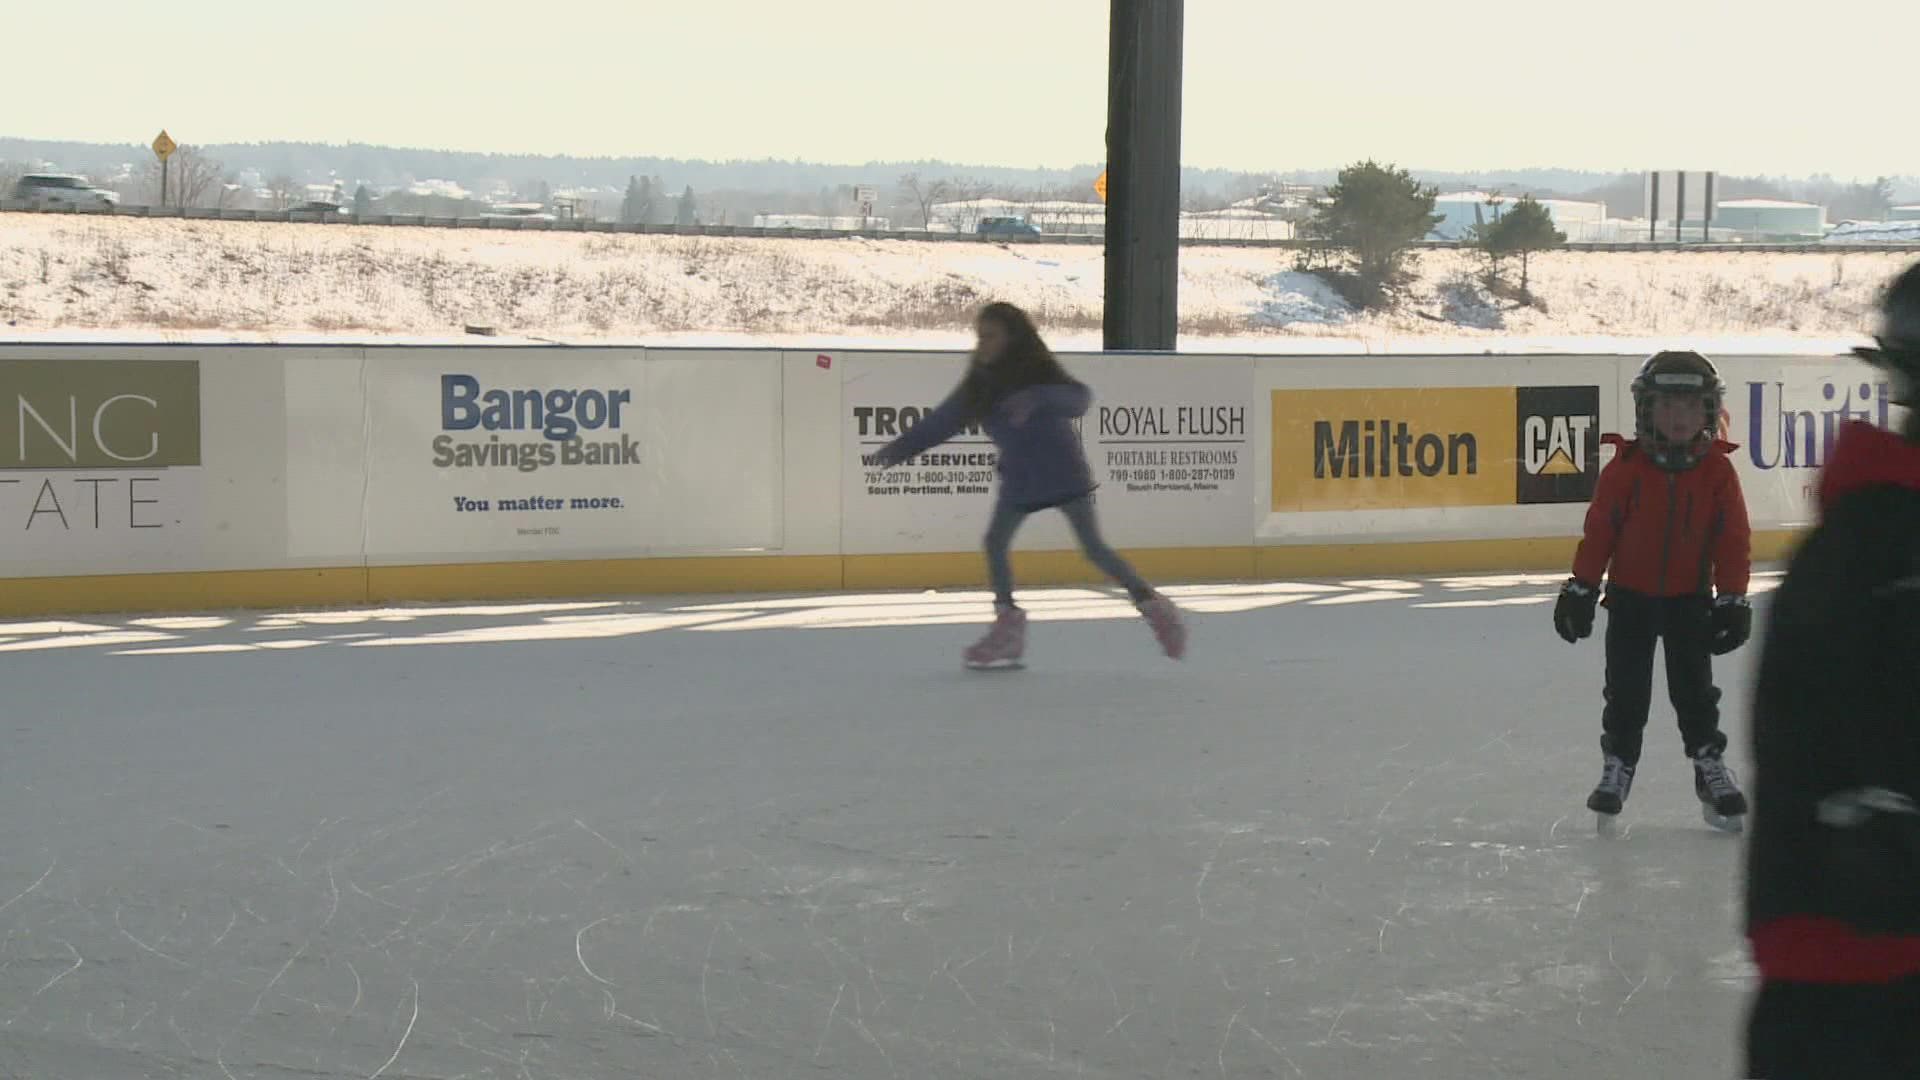 Portland's Thompson's Point is suspending rink operations for the upcoming winter due to a number of development projects in the works.